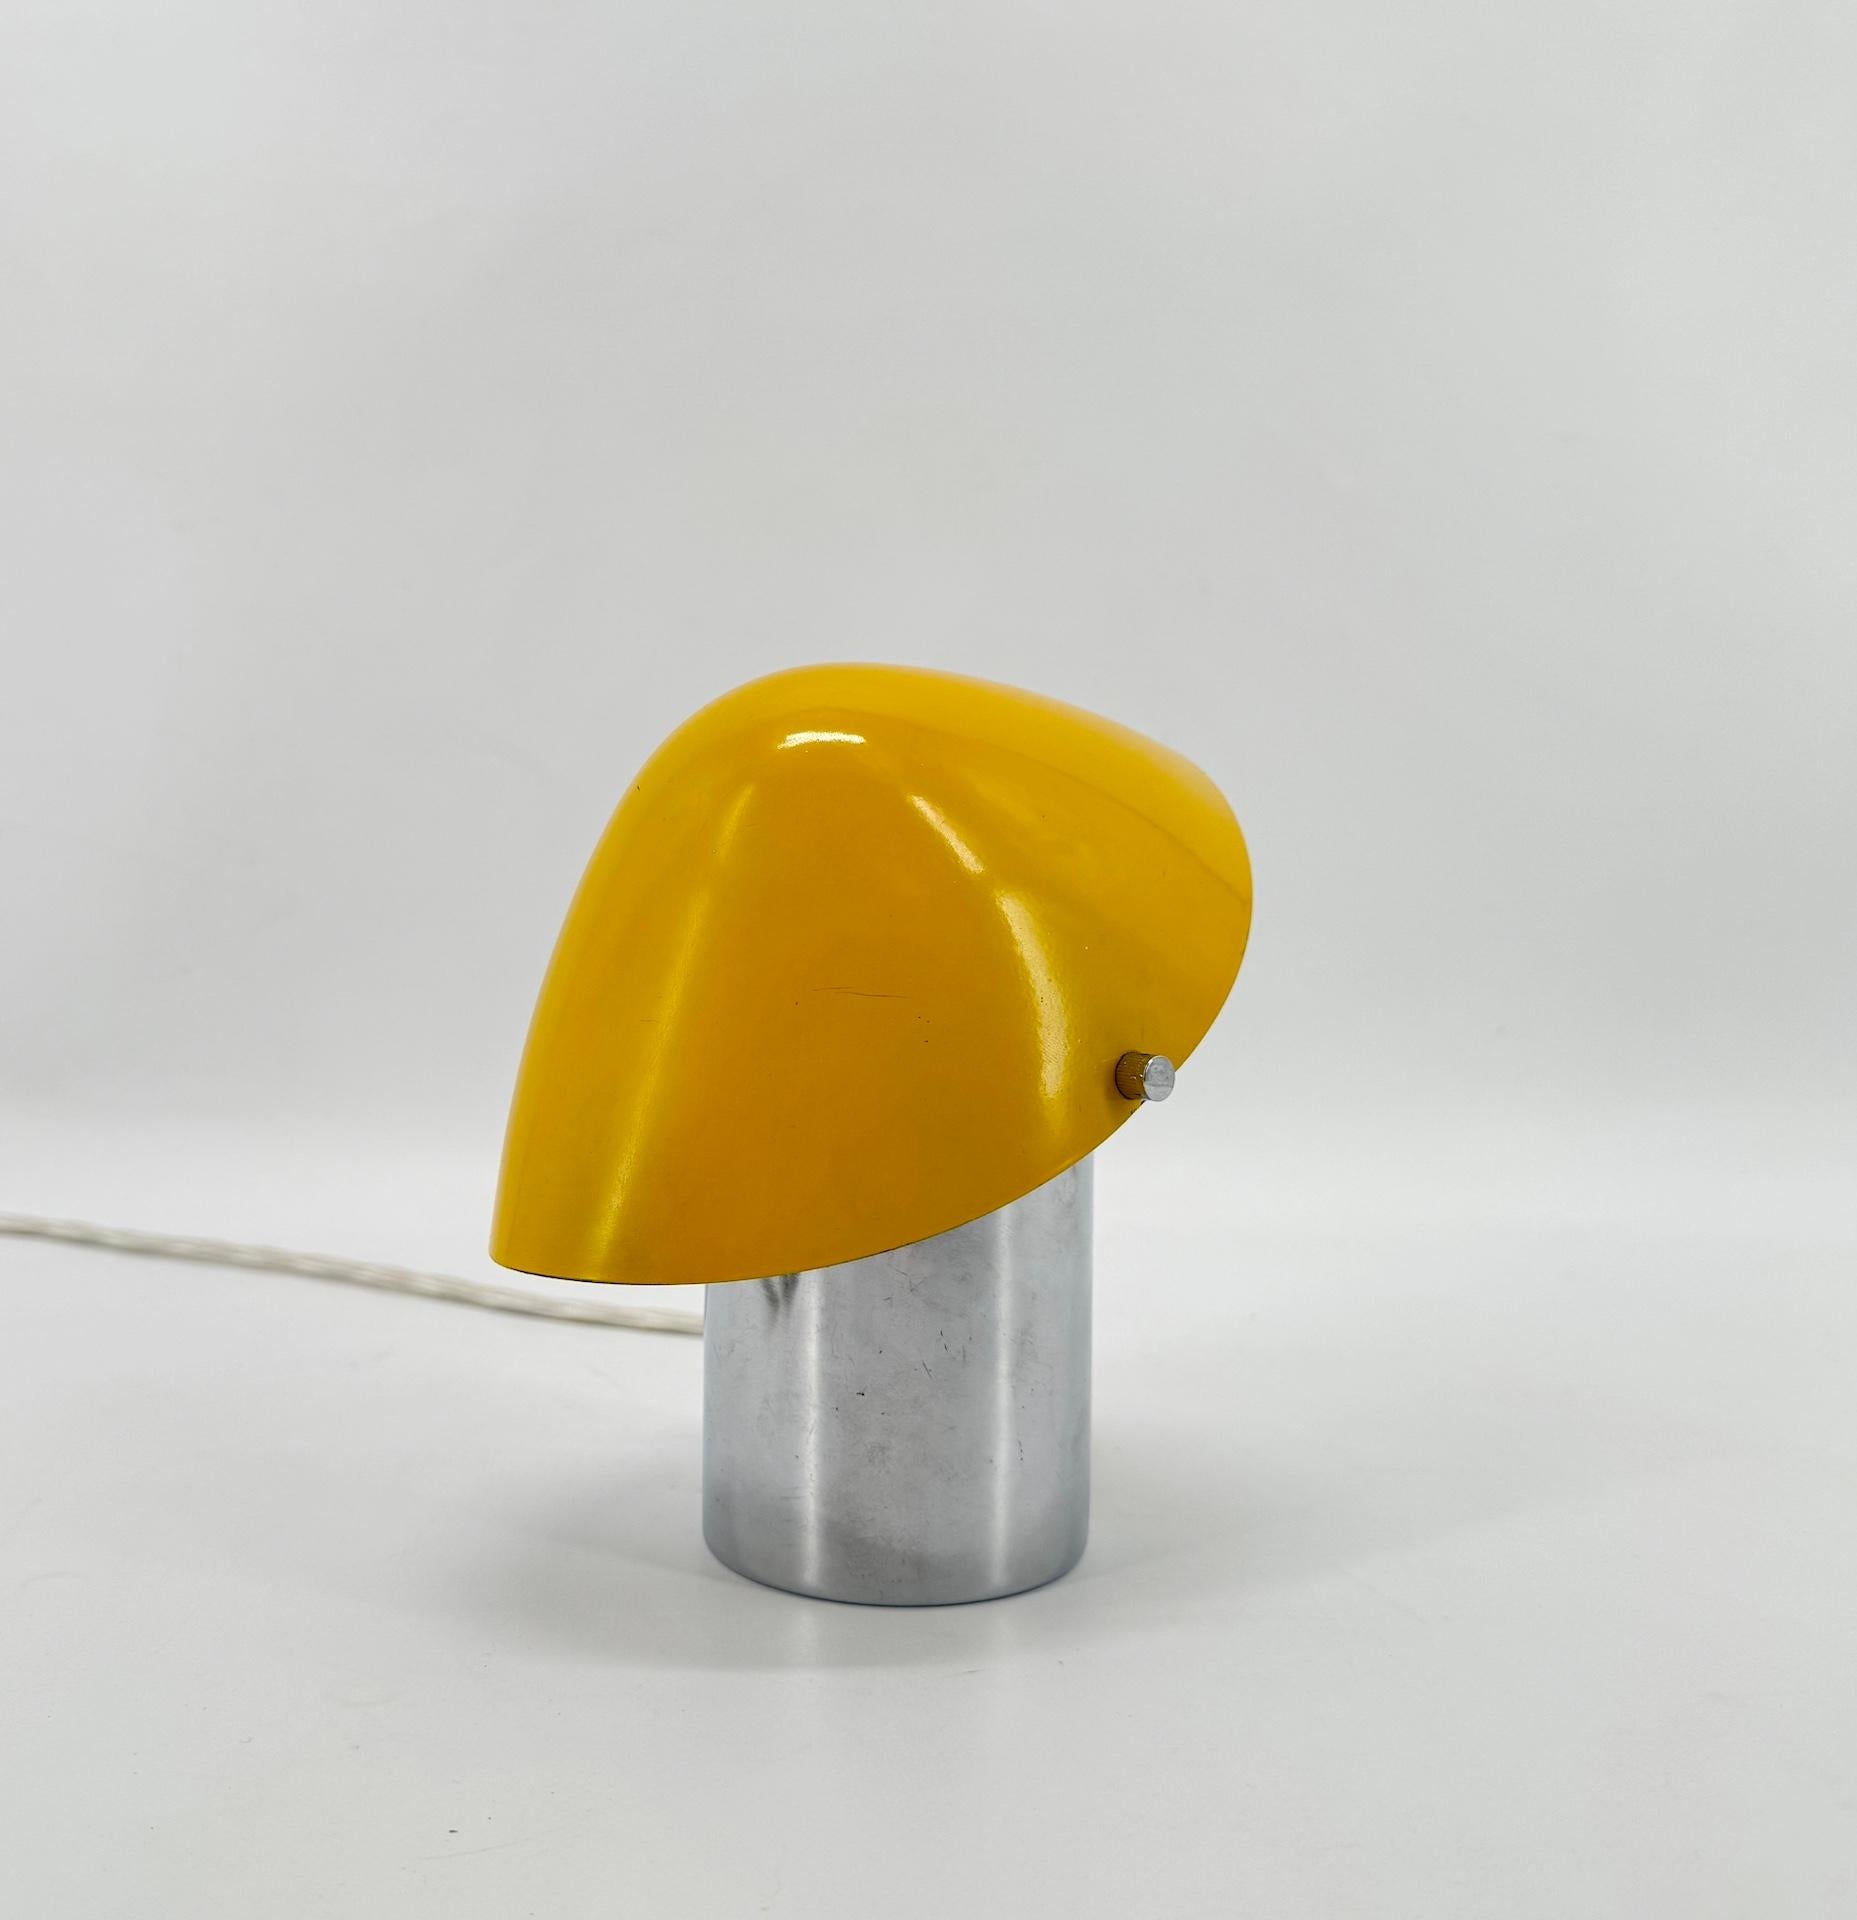 Small yellow adjustable table lamp by Josef Hurka, circa 1960, Czechoslovakia.

This is a small lamp in a beautiful yellow color to create a light point or illuminate an area or an object.

The lacquered metal 'mushroom' light shade tilts on each